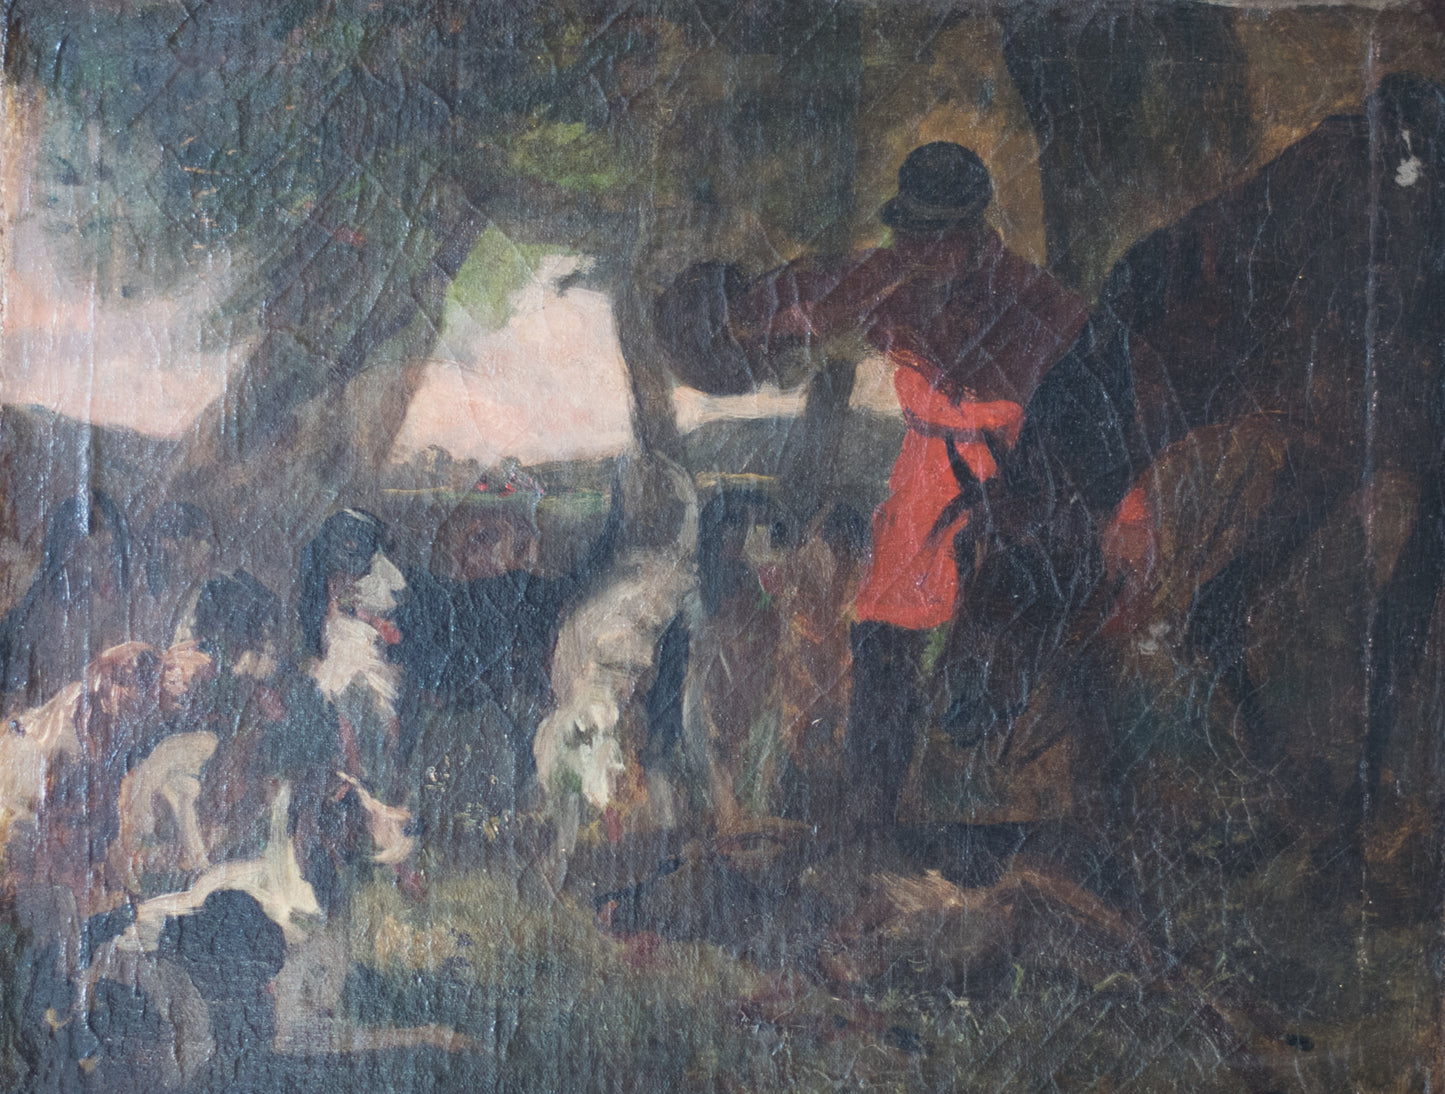 Study of a Hunting Scene - Oil on Canvas